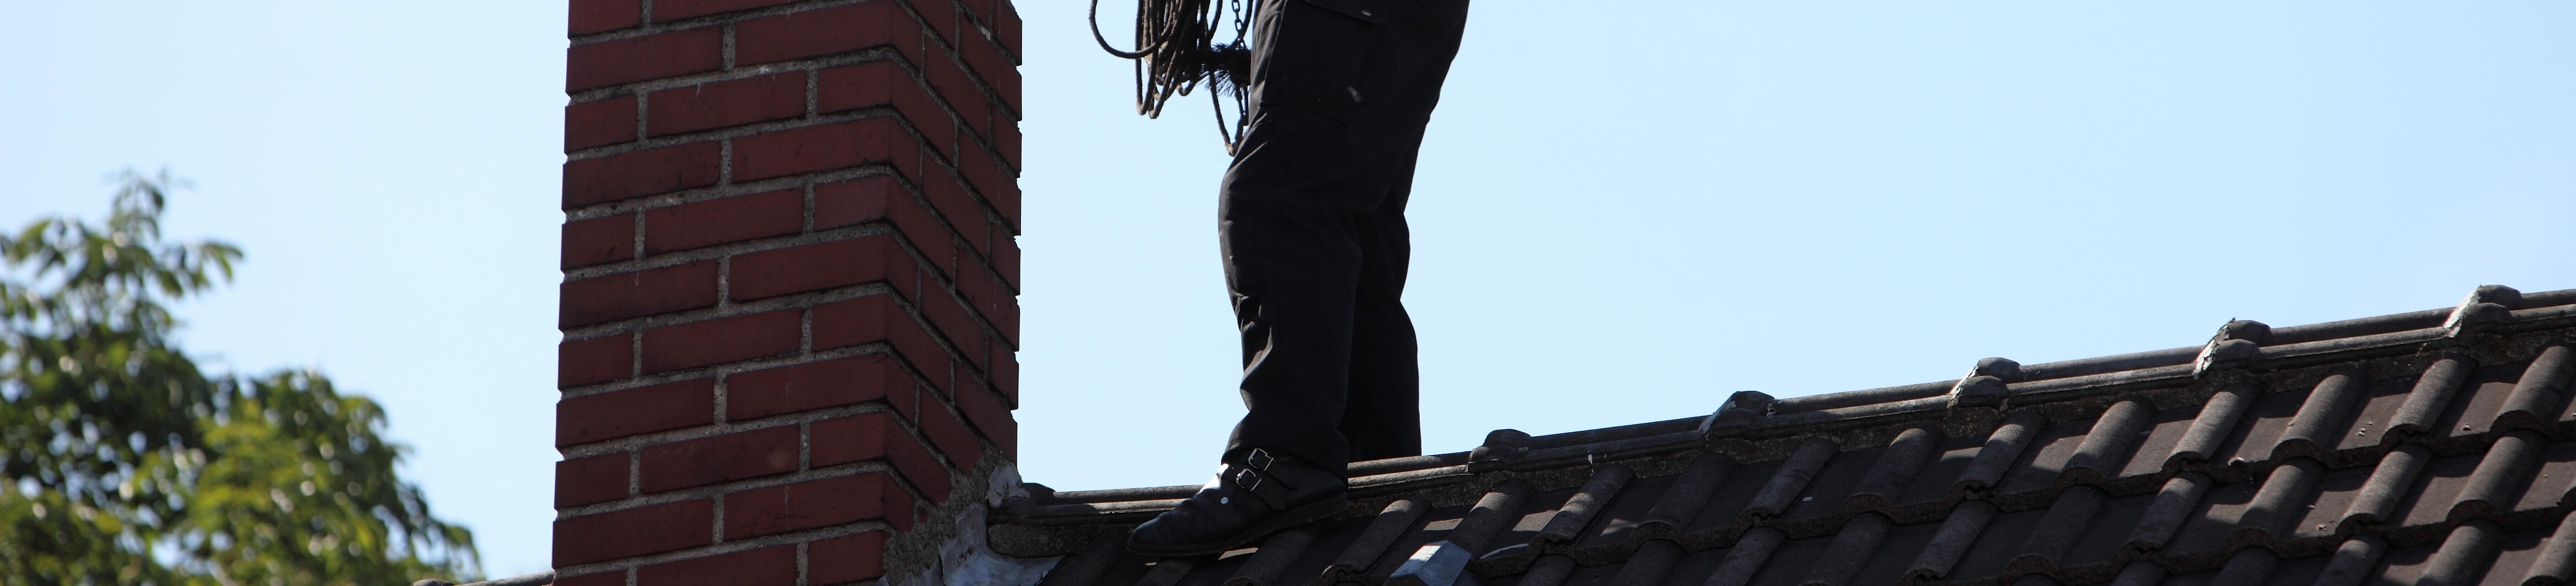 sweep on roof inspecting chimney